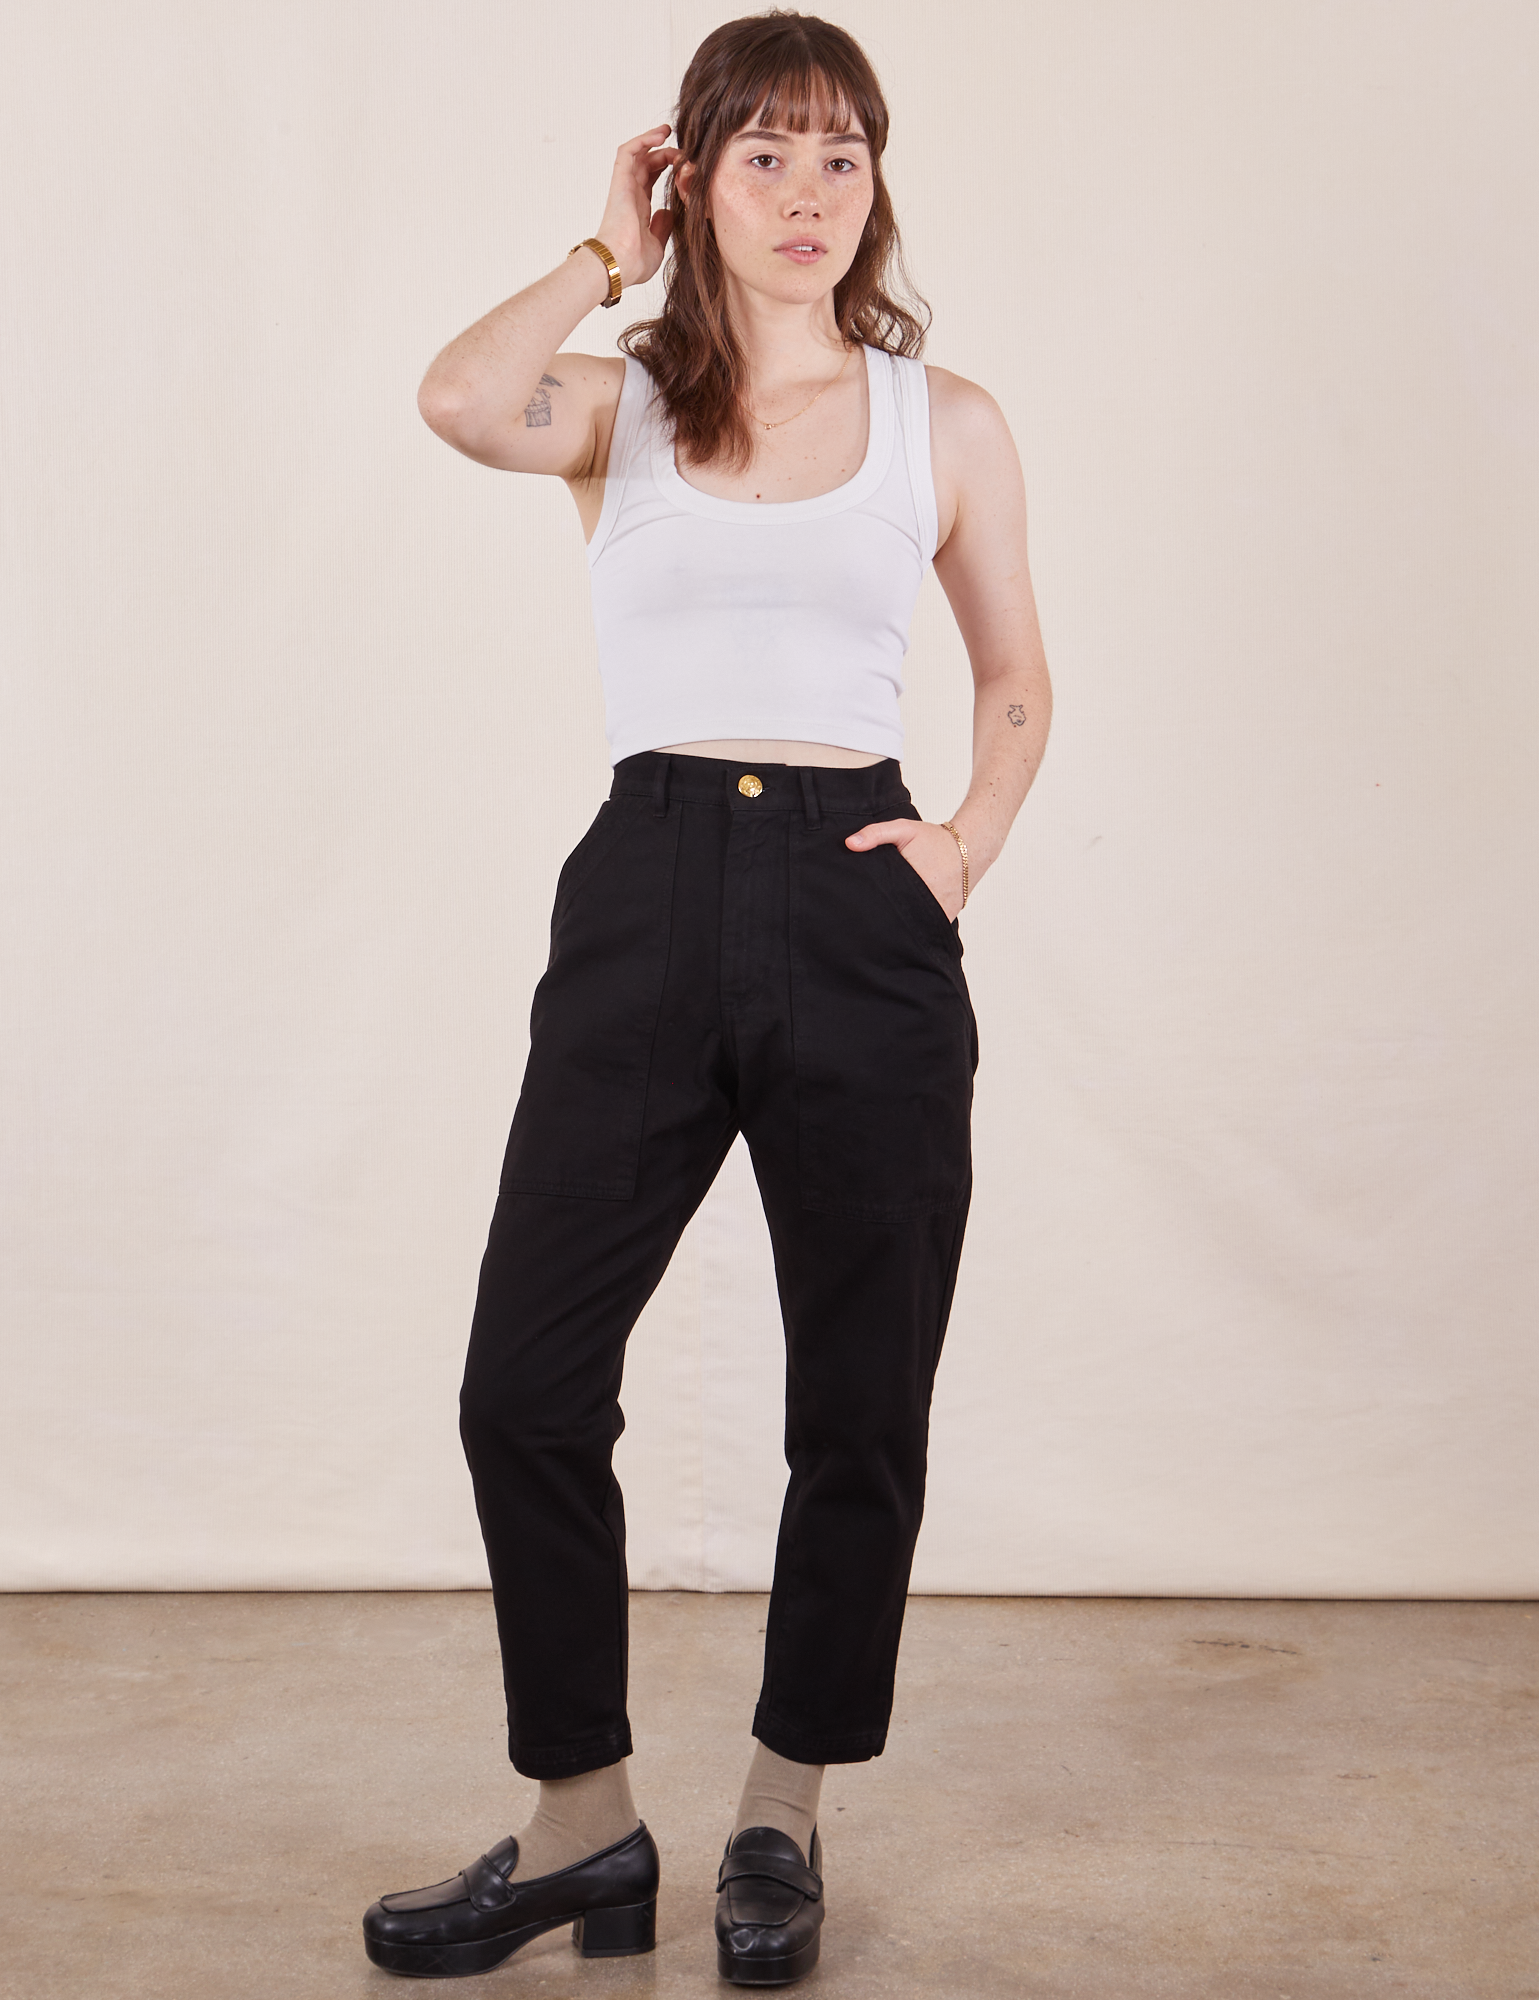 Hana is 5&#39;3&quot; and wearing XXS Petite Pencil Pants in Basic Black paired with vintage off-white Cropped Tank Top